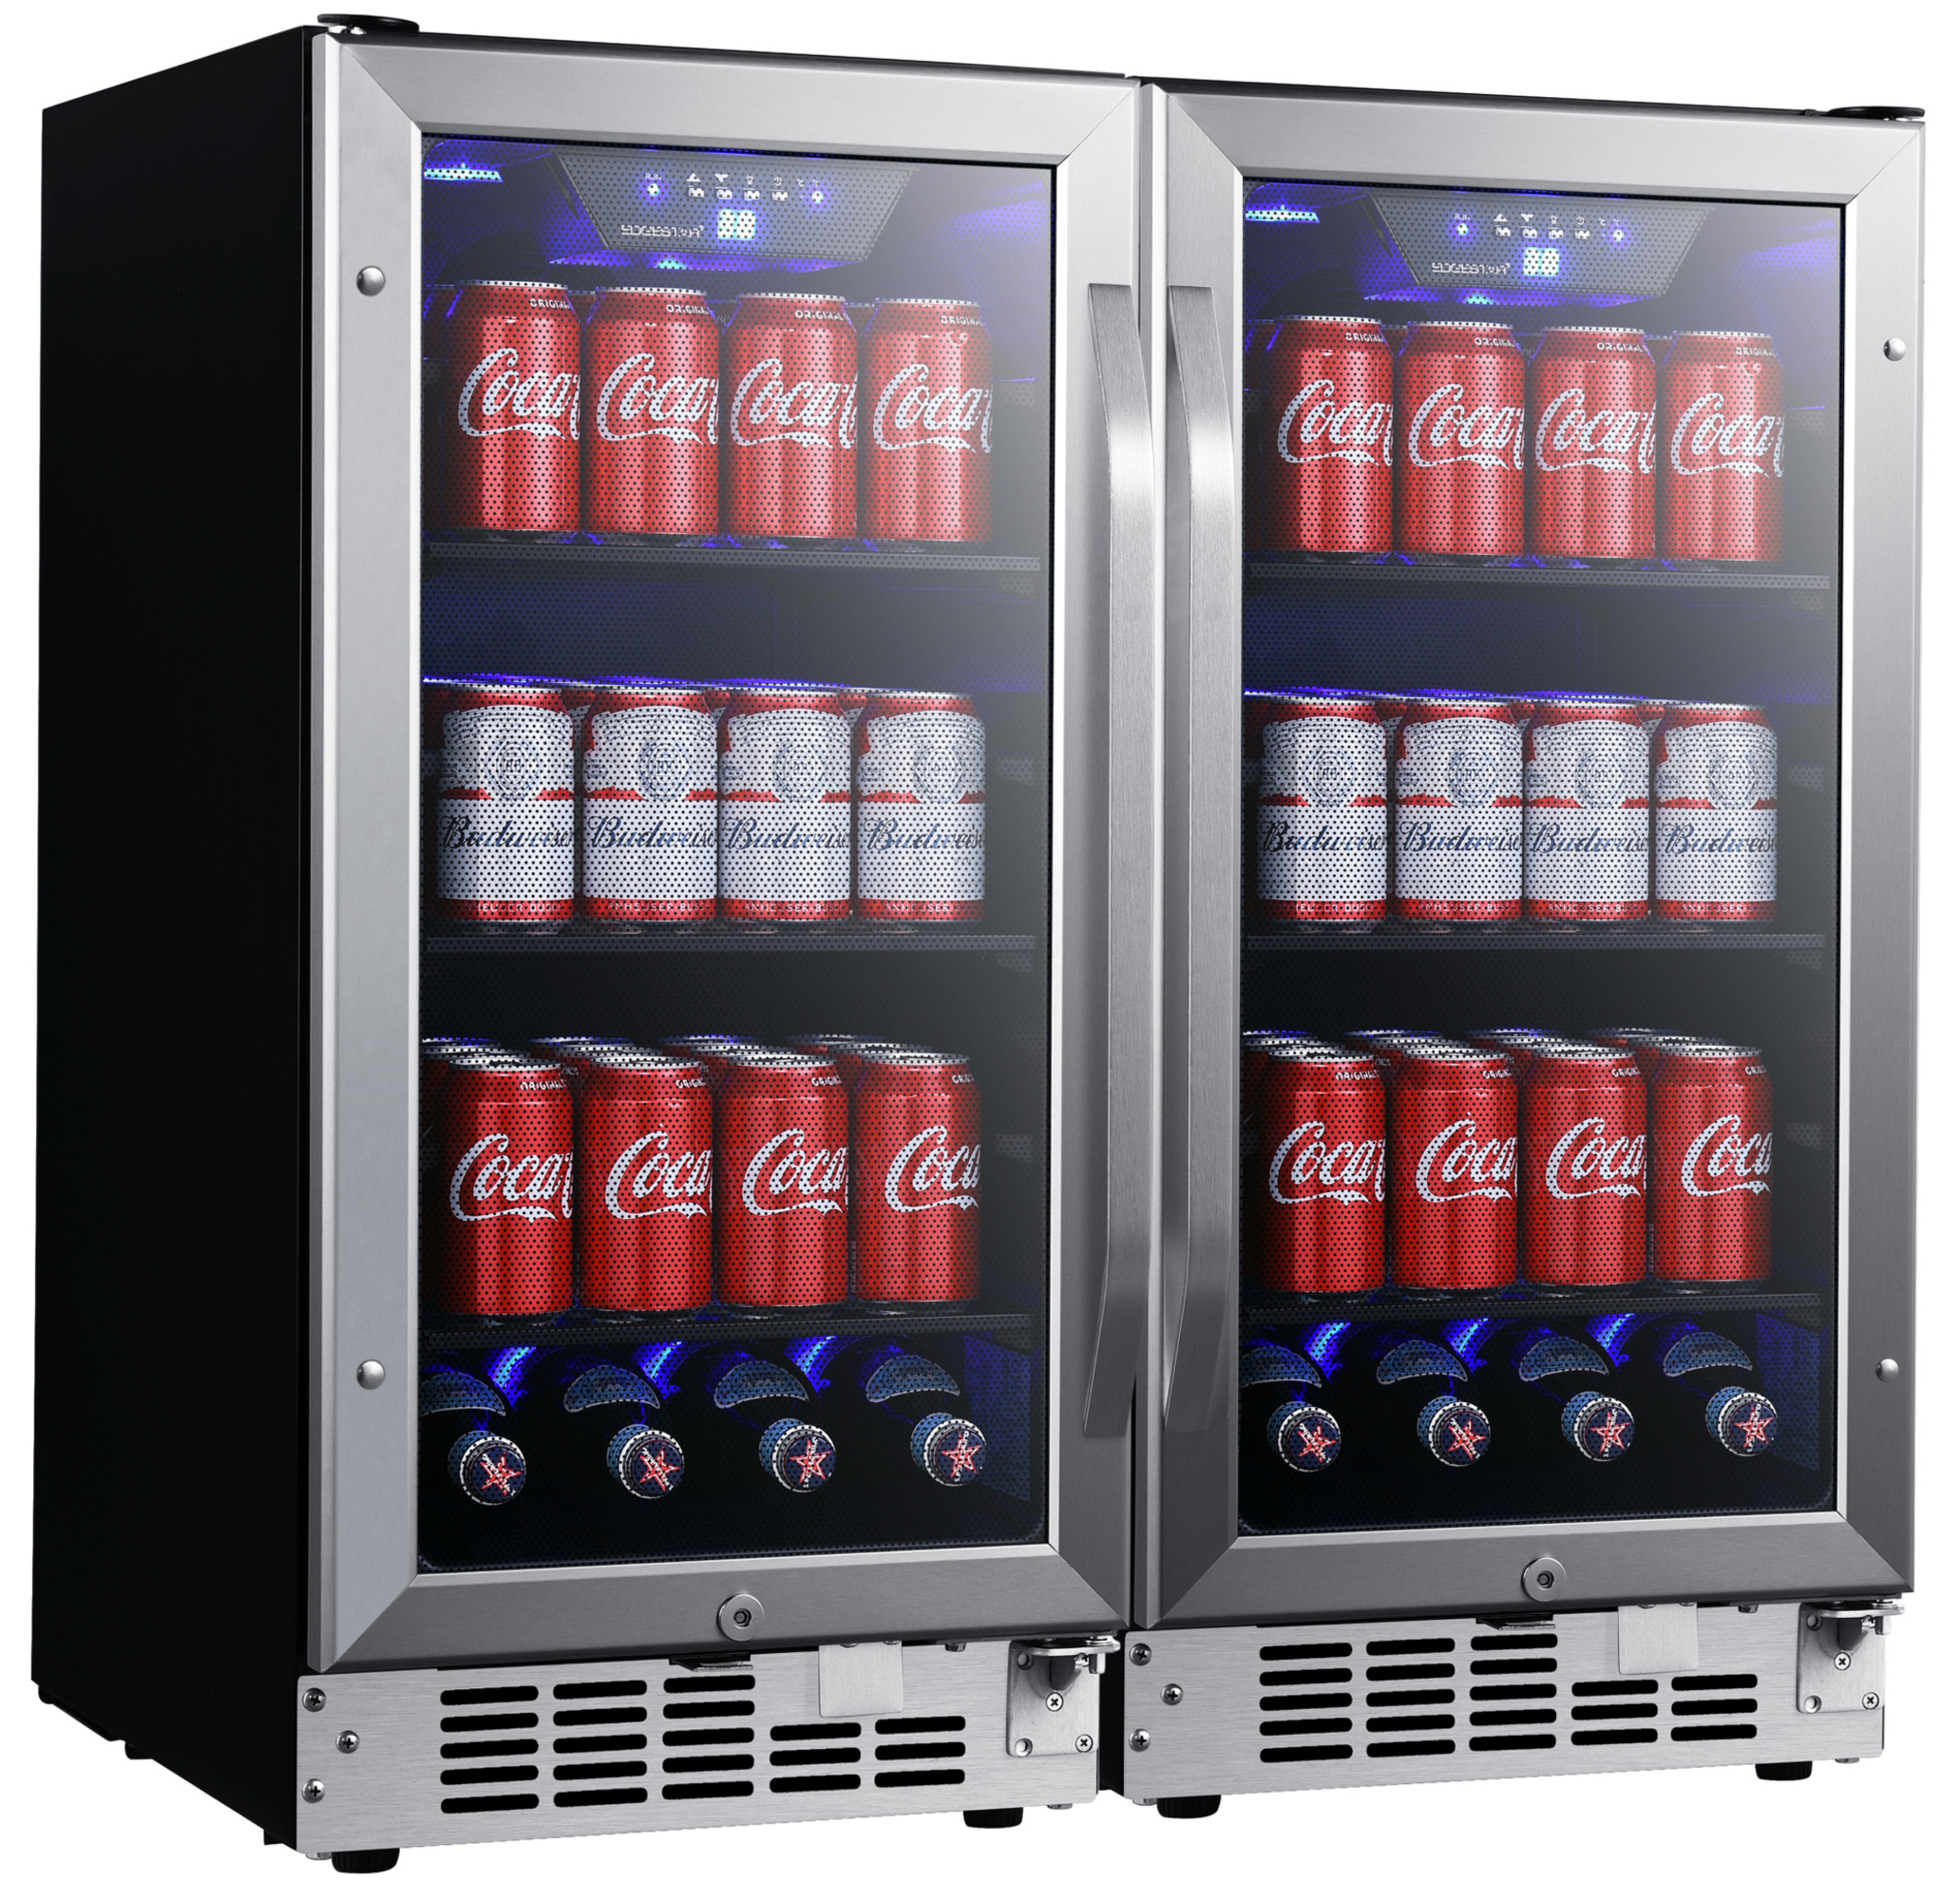 Edgestar Cbr902sgdual 30" Wide 160 Can Built-In Side By Side Beverage Cooler - Stainless - image 2 of 2